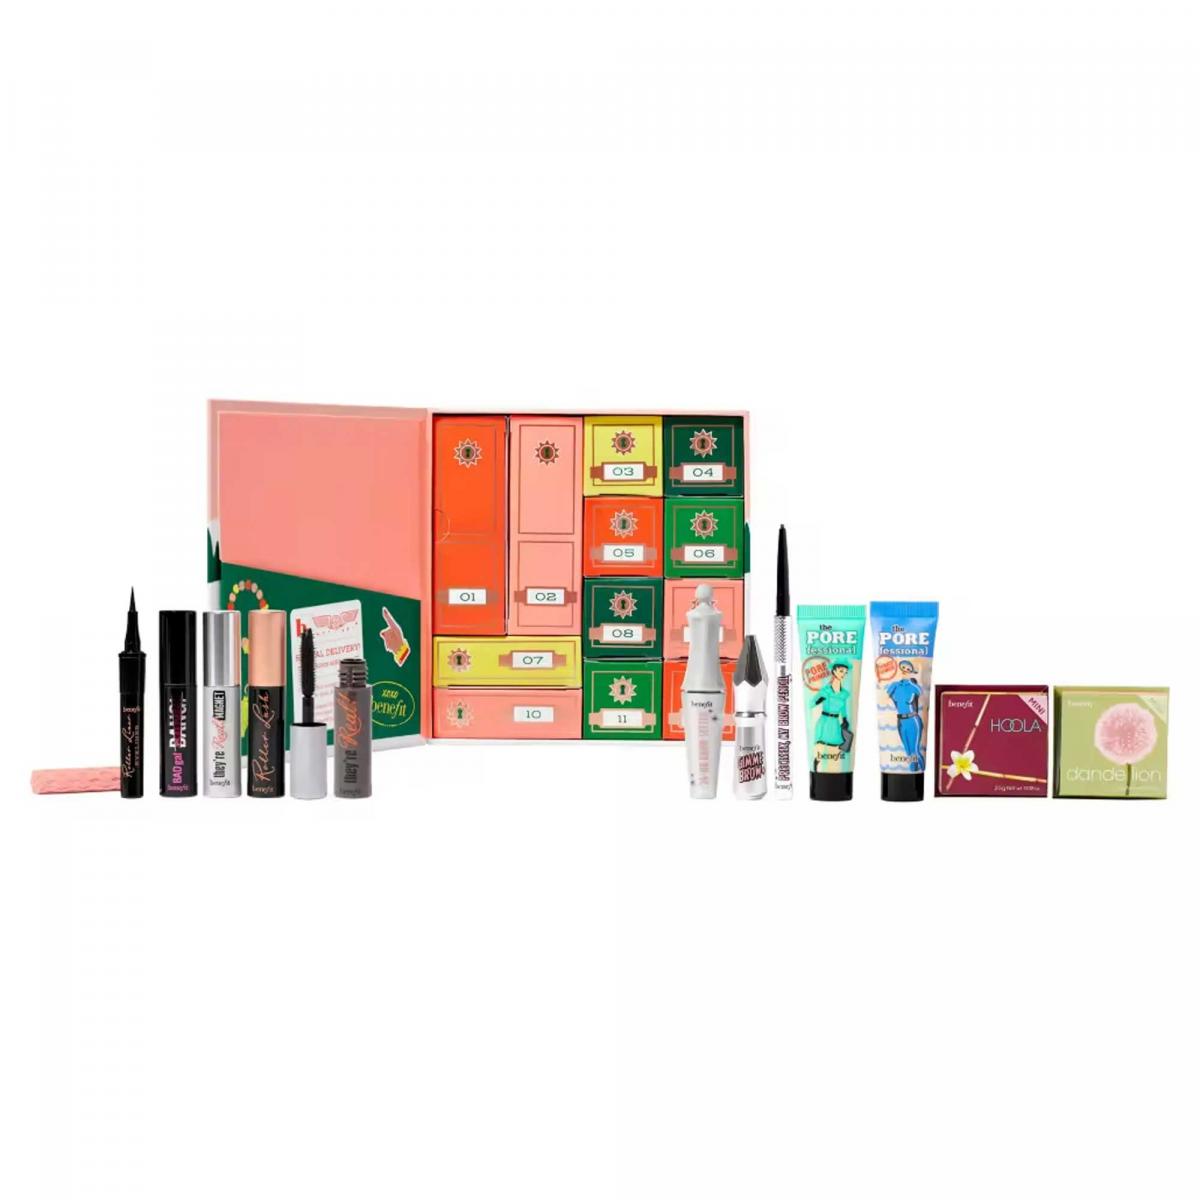 Sincerely Yours, Beauty Holiday Adventskalender